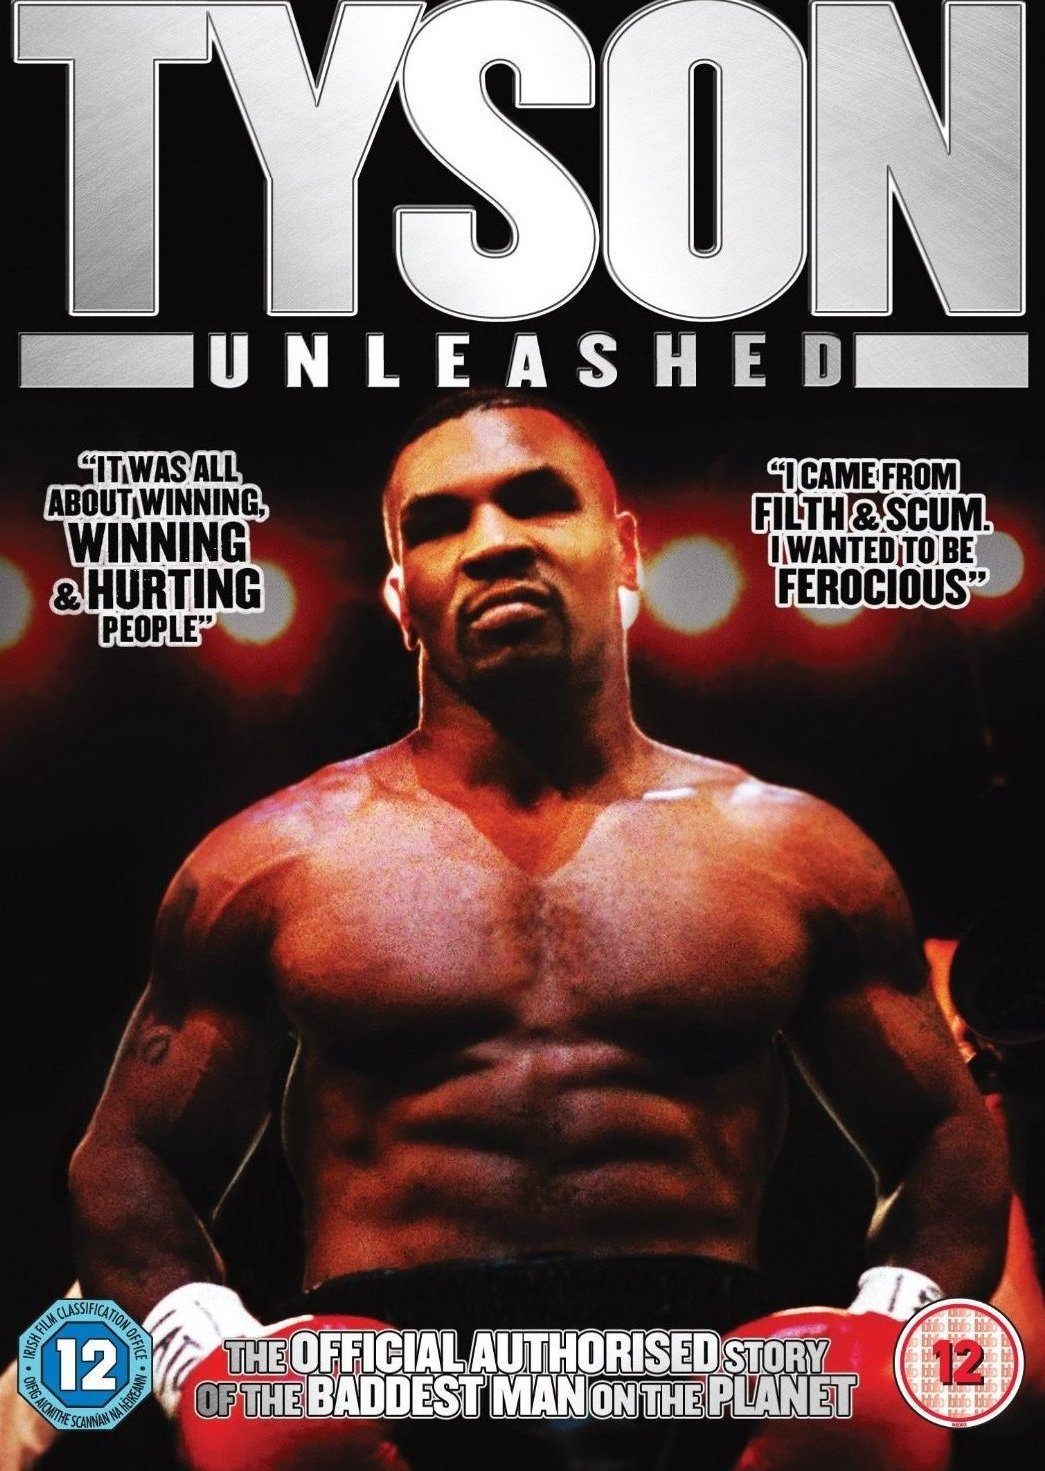 Yvette Rowland produced 'Tyson Unleashed' Released in 2010 featuring 'Iron' Mike Tyson.